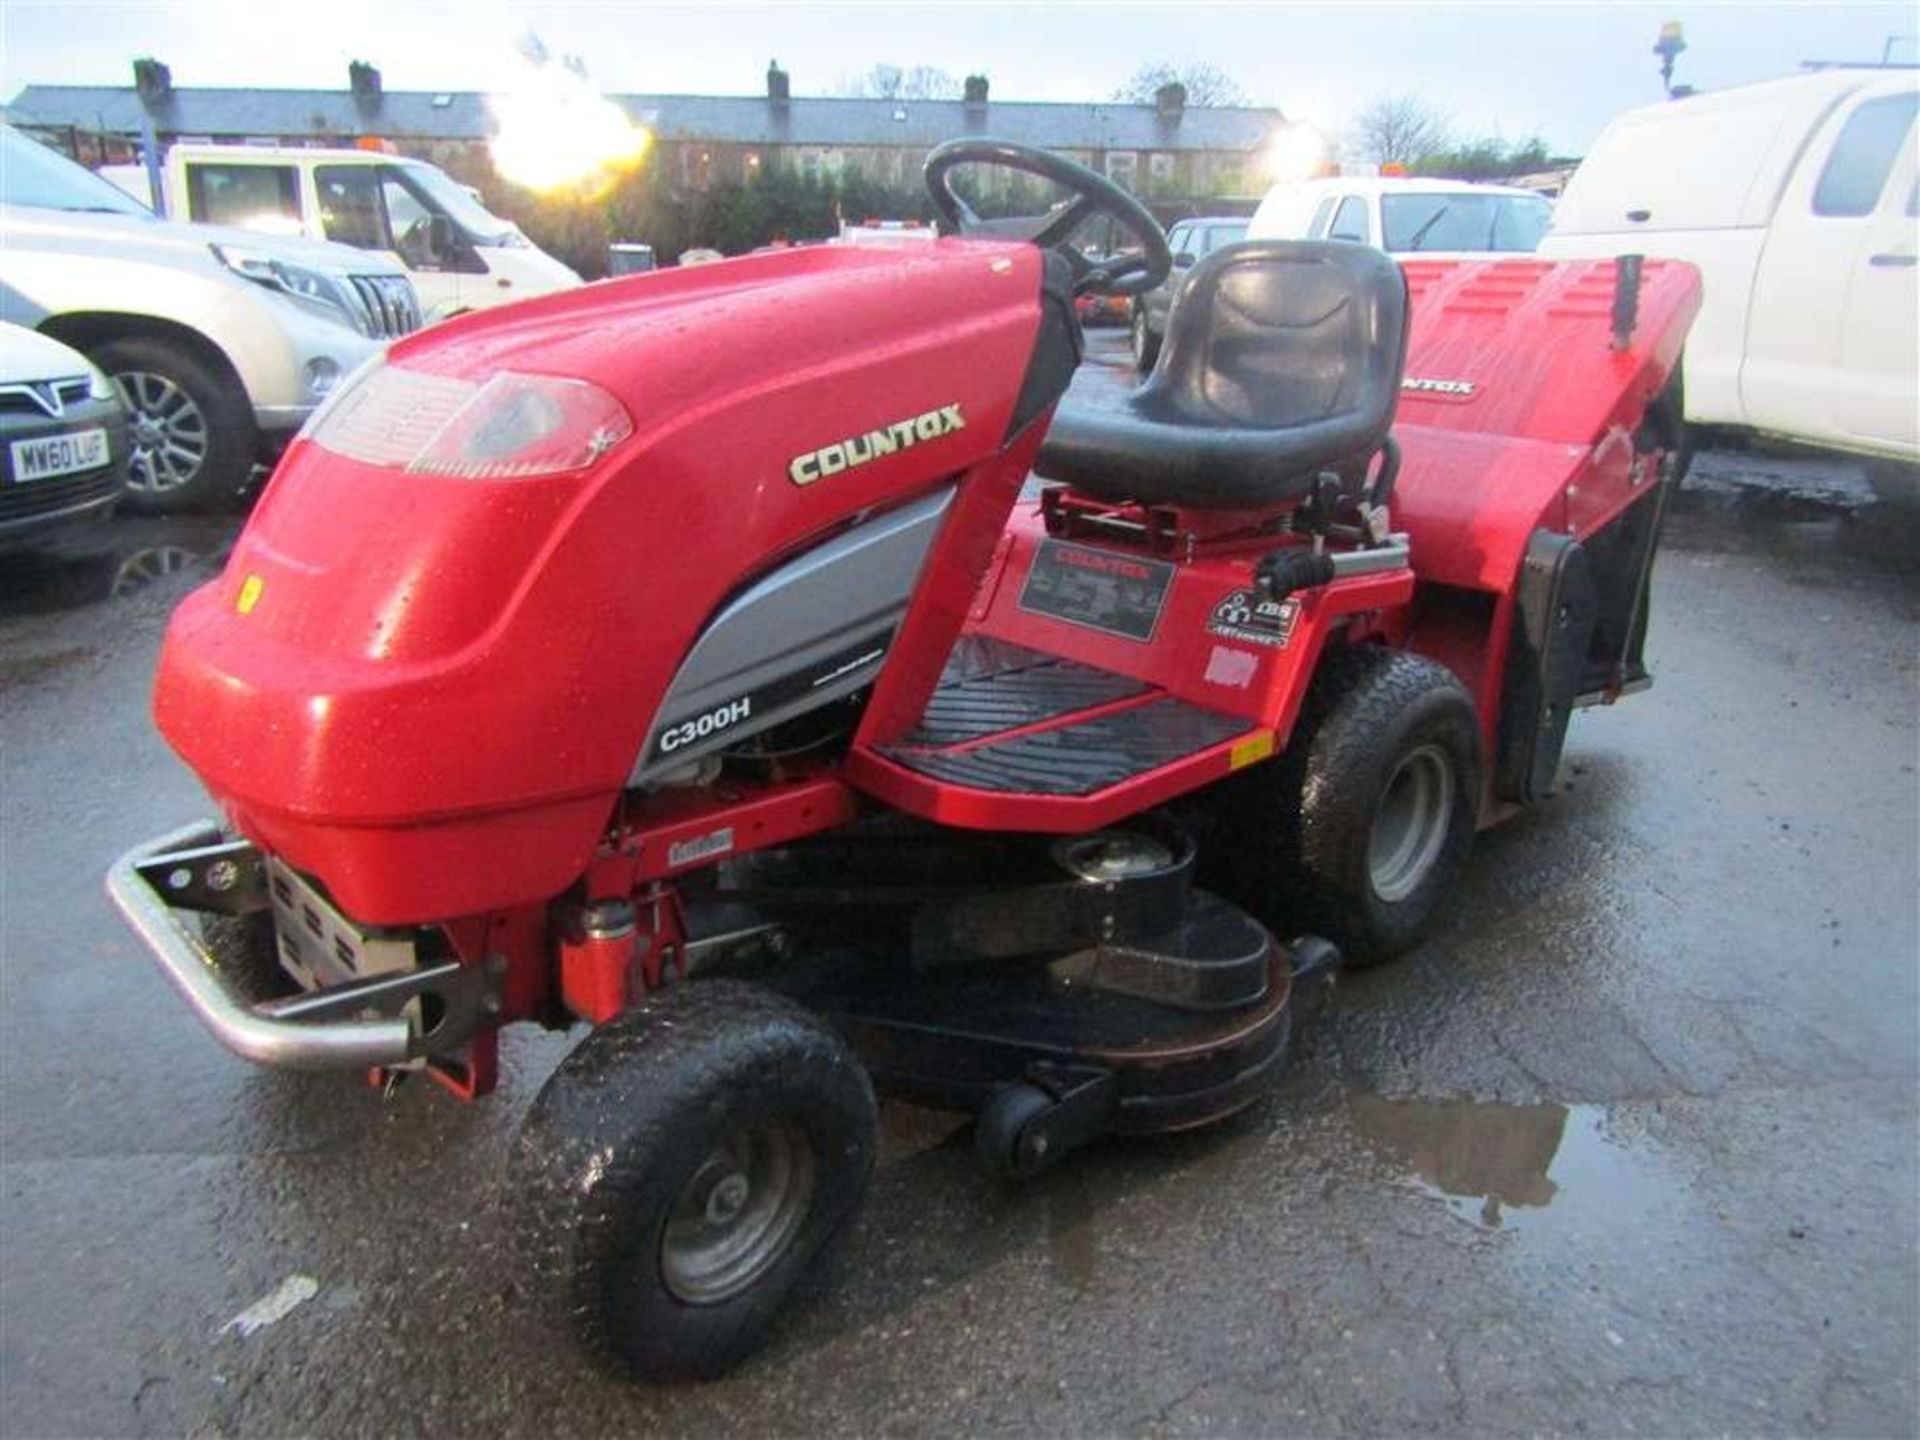 Countax C600H Petrol Ride on Mower with Honda Engine, Brushcutter & Collector Box - Image 2 of 5